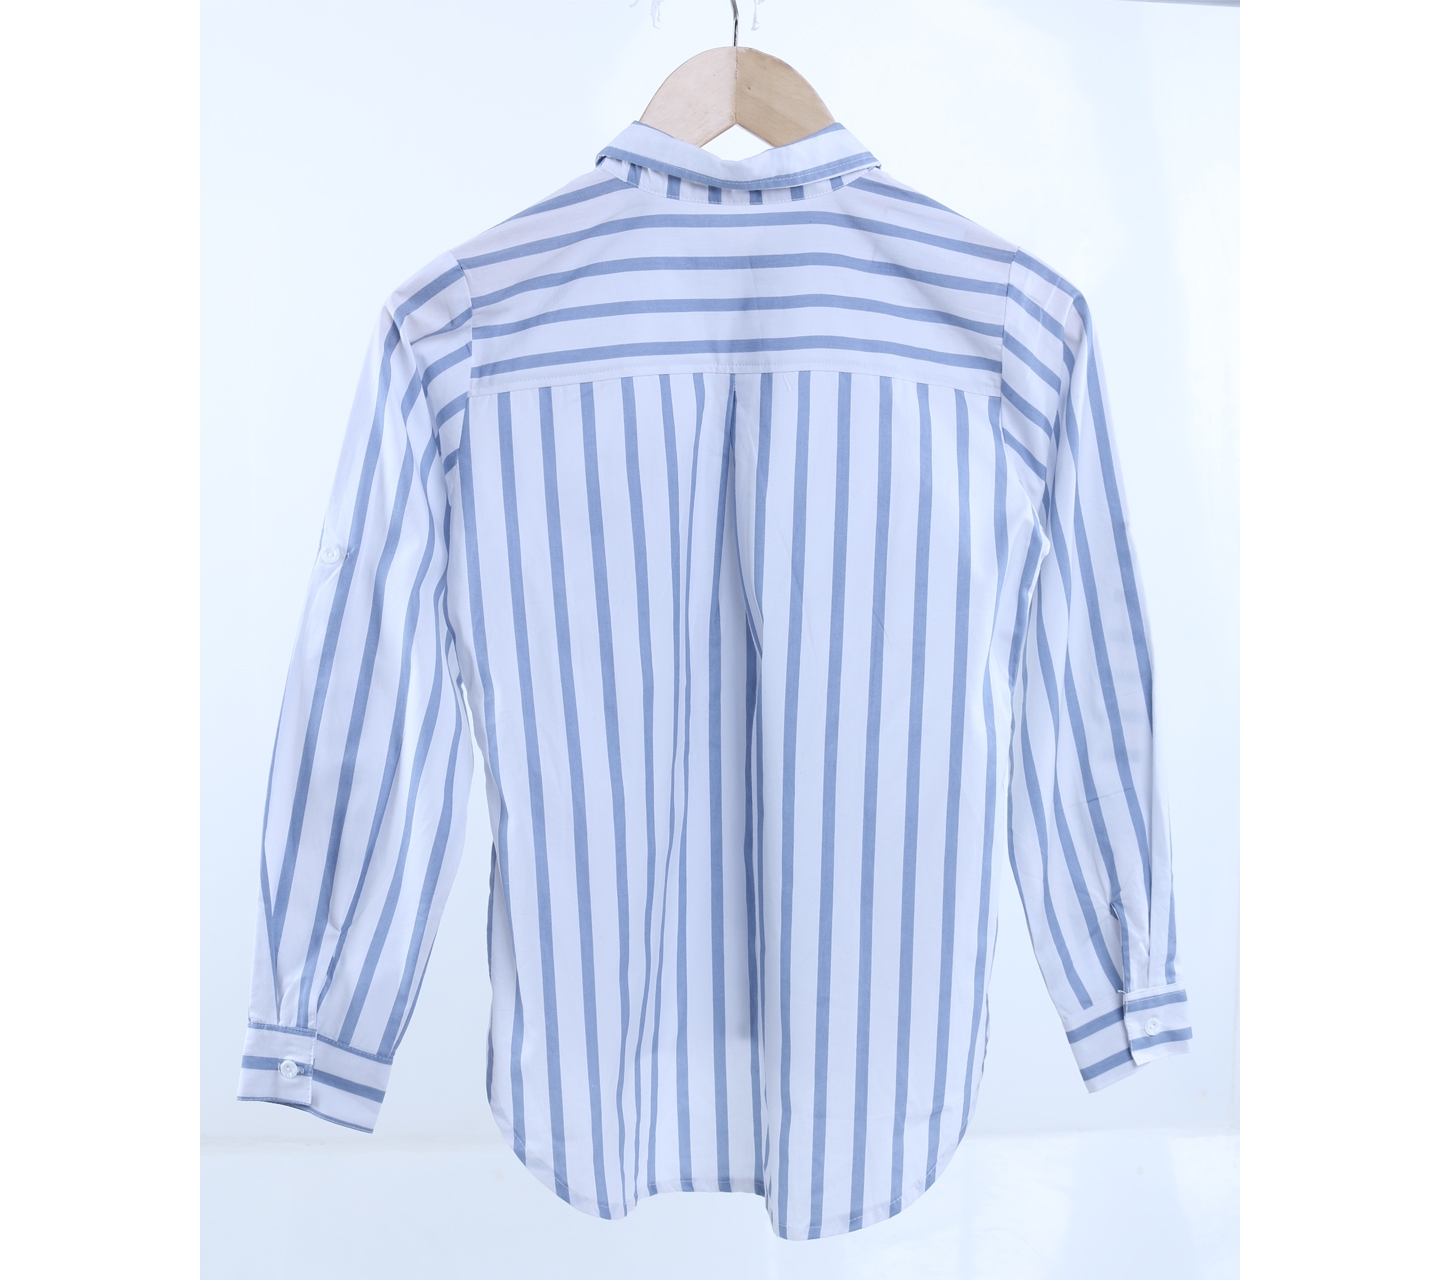 Tinkerlust White And Blue Striped Shirt